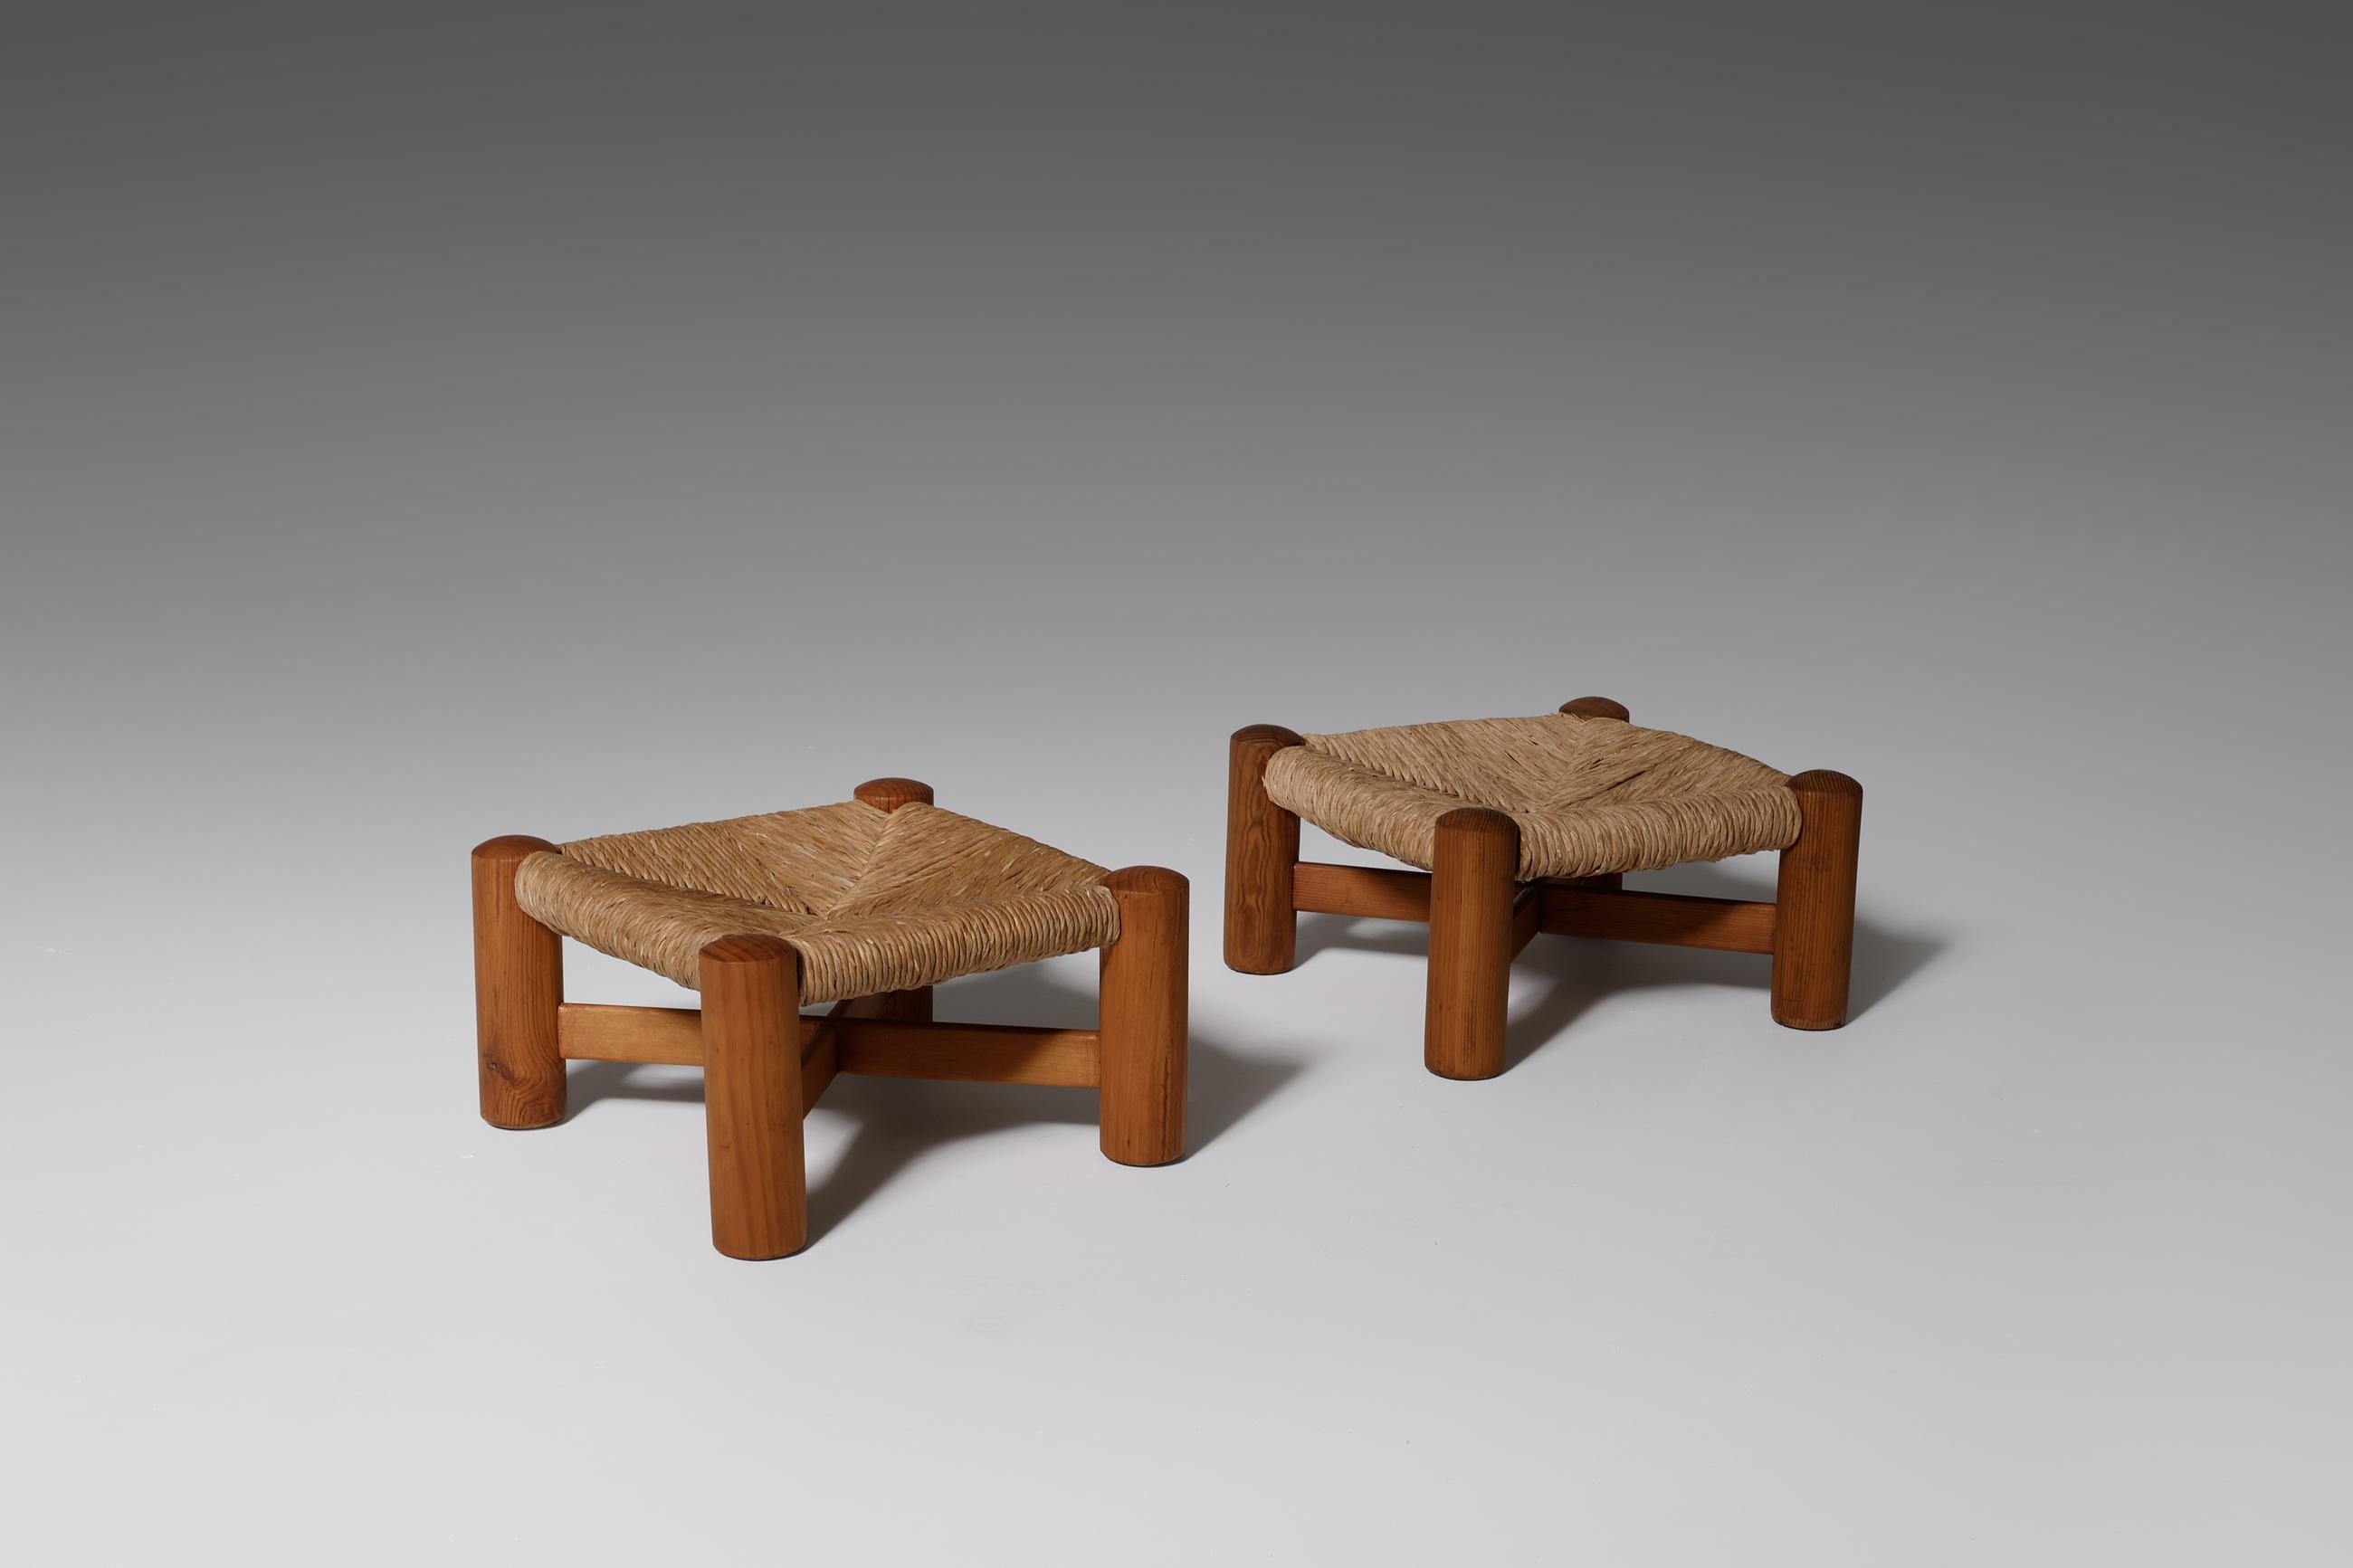 Footstools by Wim Den Boon, Netherlands, 1950. Modernist design made of solid pine and Rush. In the style of Charlotte Perriand. In good condition with a nice patina.